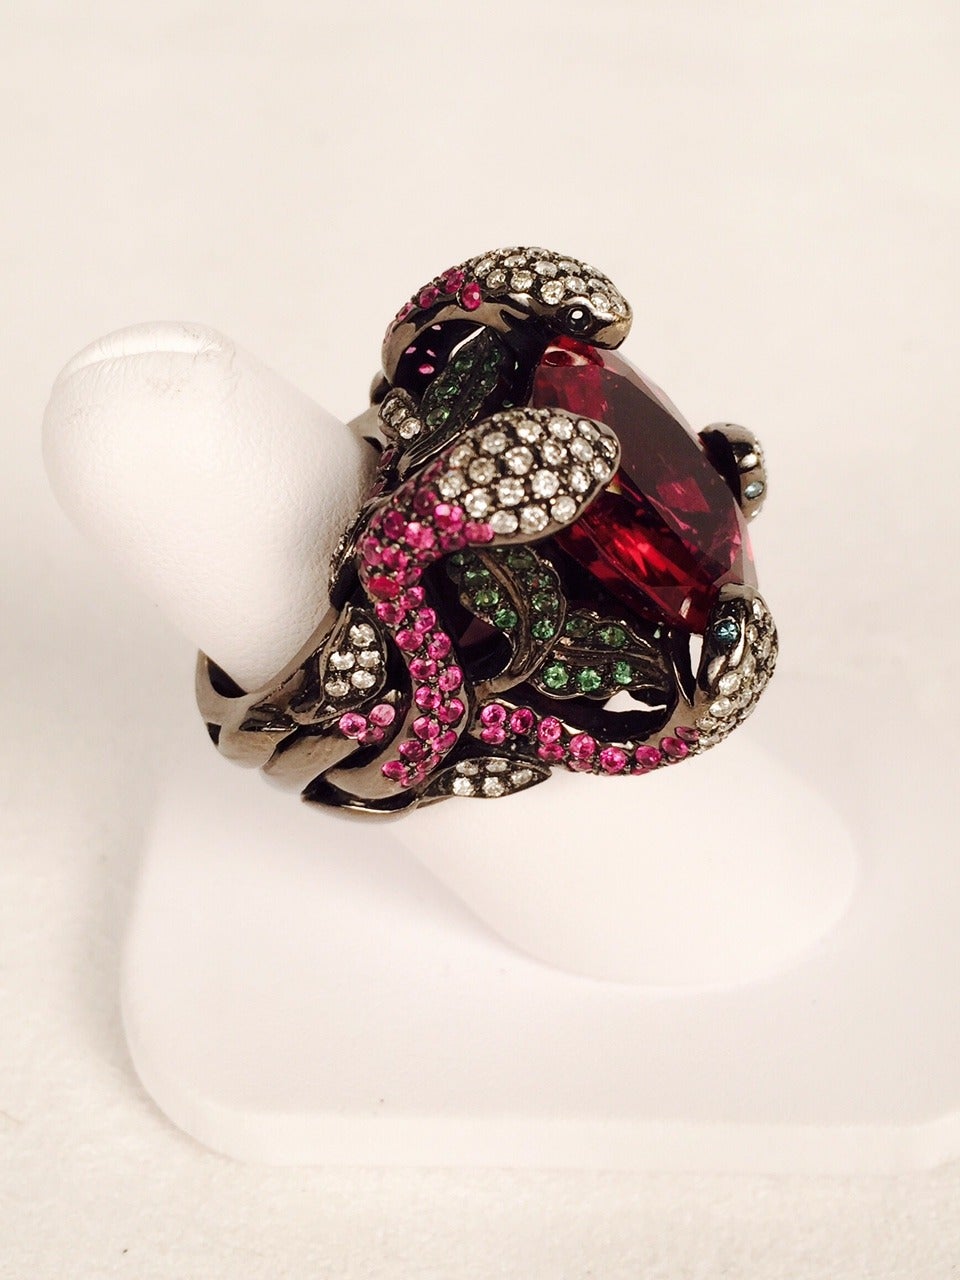 Incredible Rubellite Tourmaline Gold Snake Ring For Sale at 1stdibs